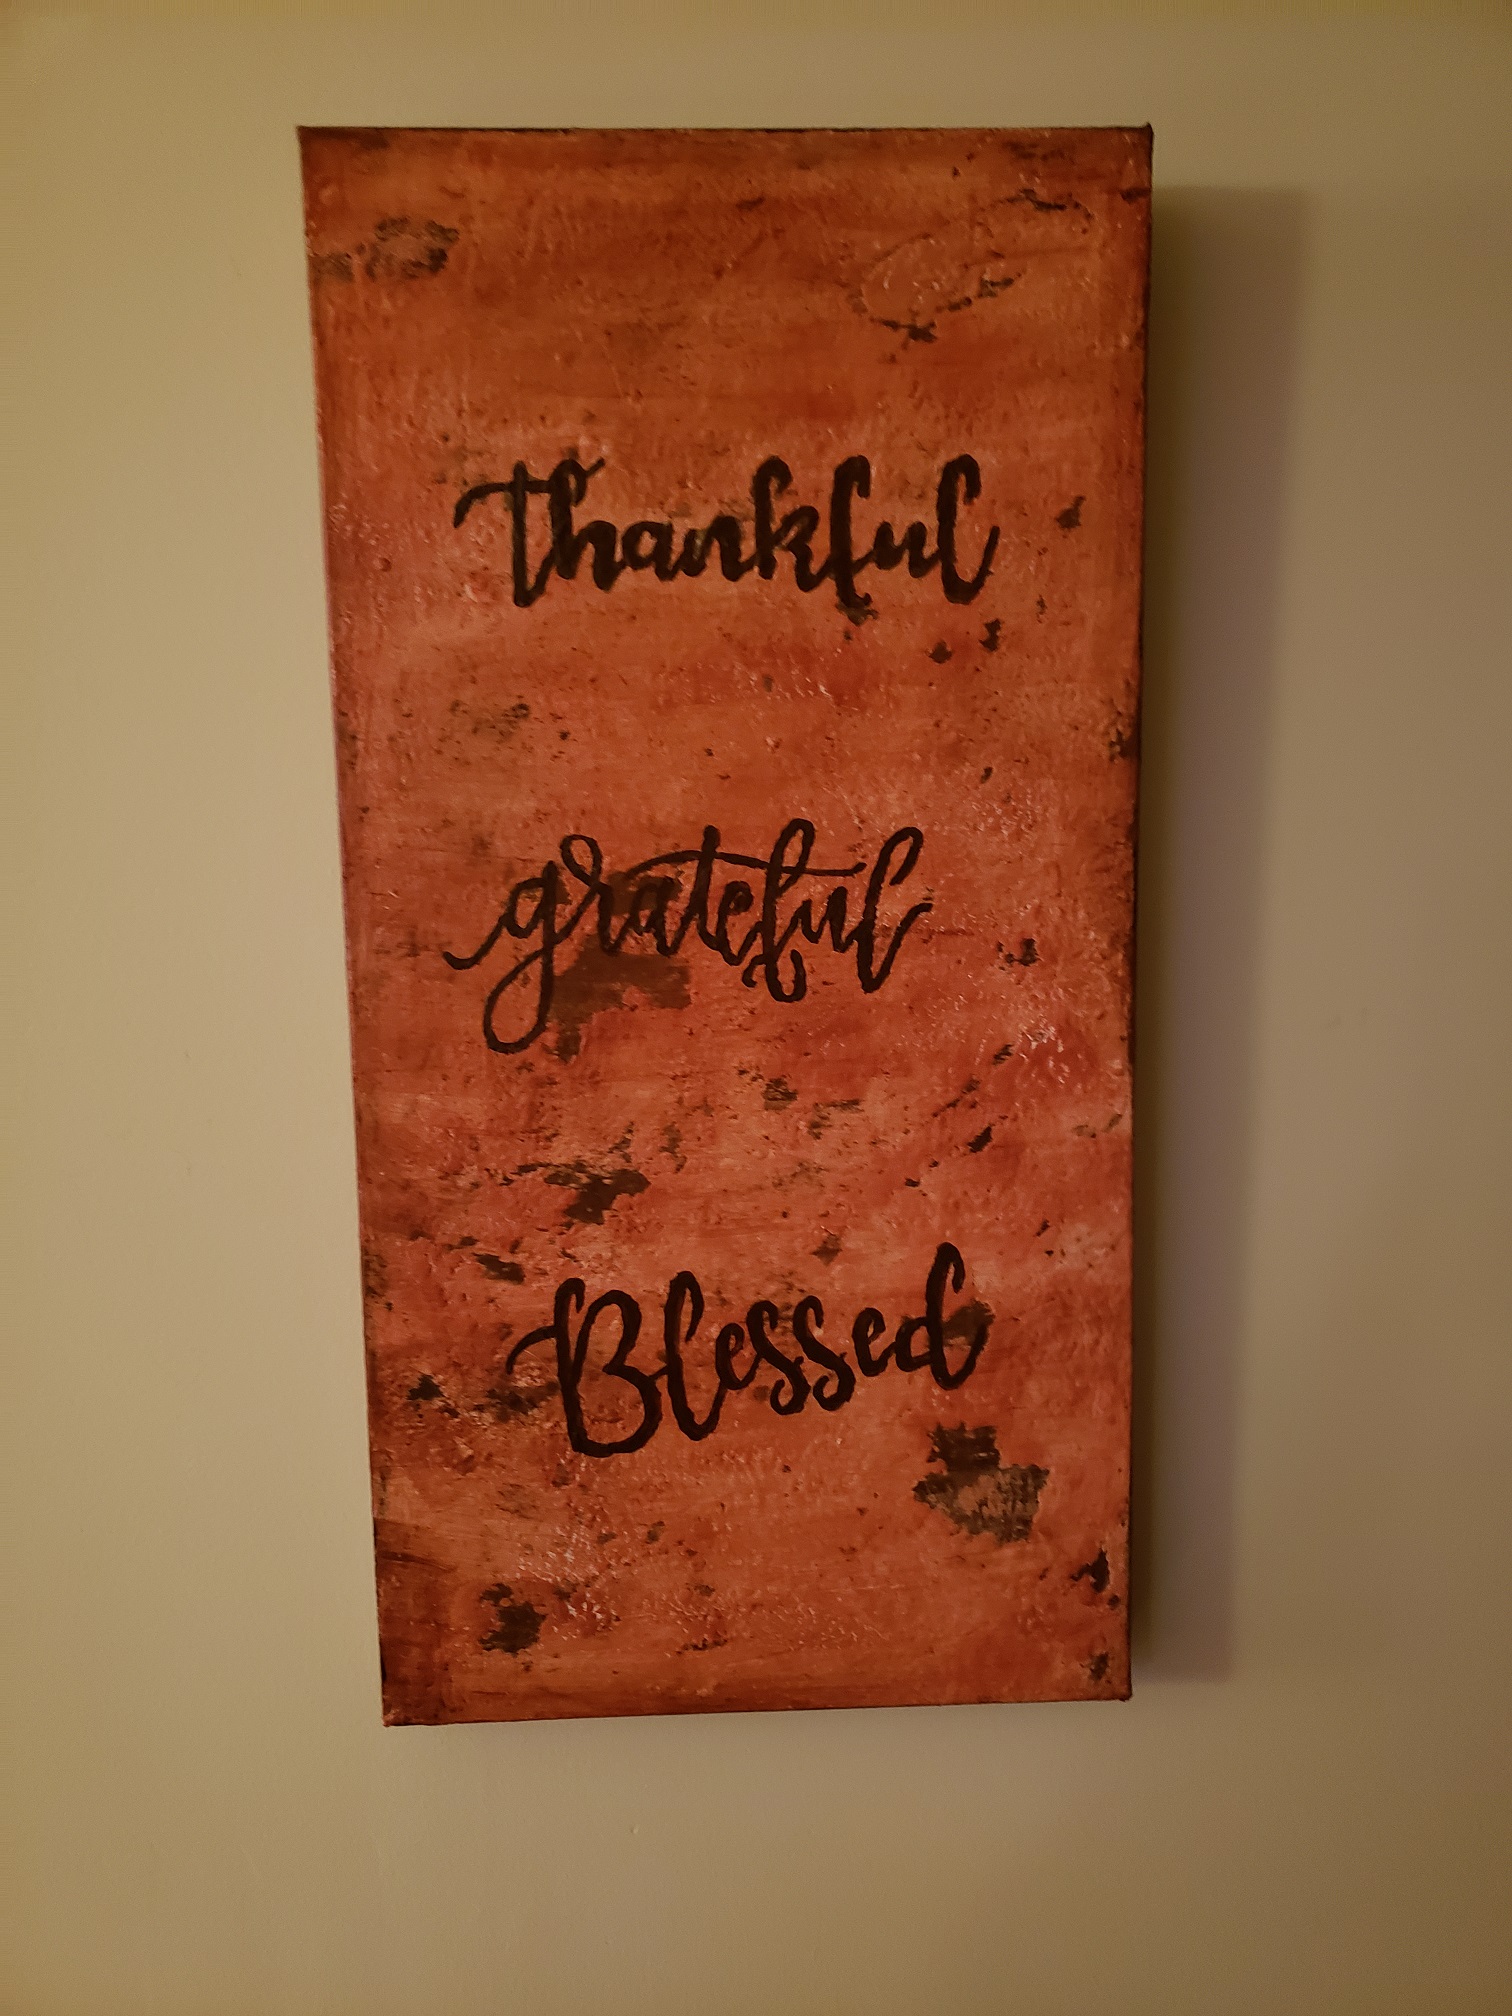 Thankful, Grateful, Blessed Series